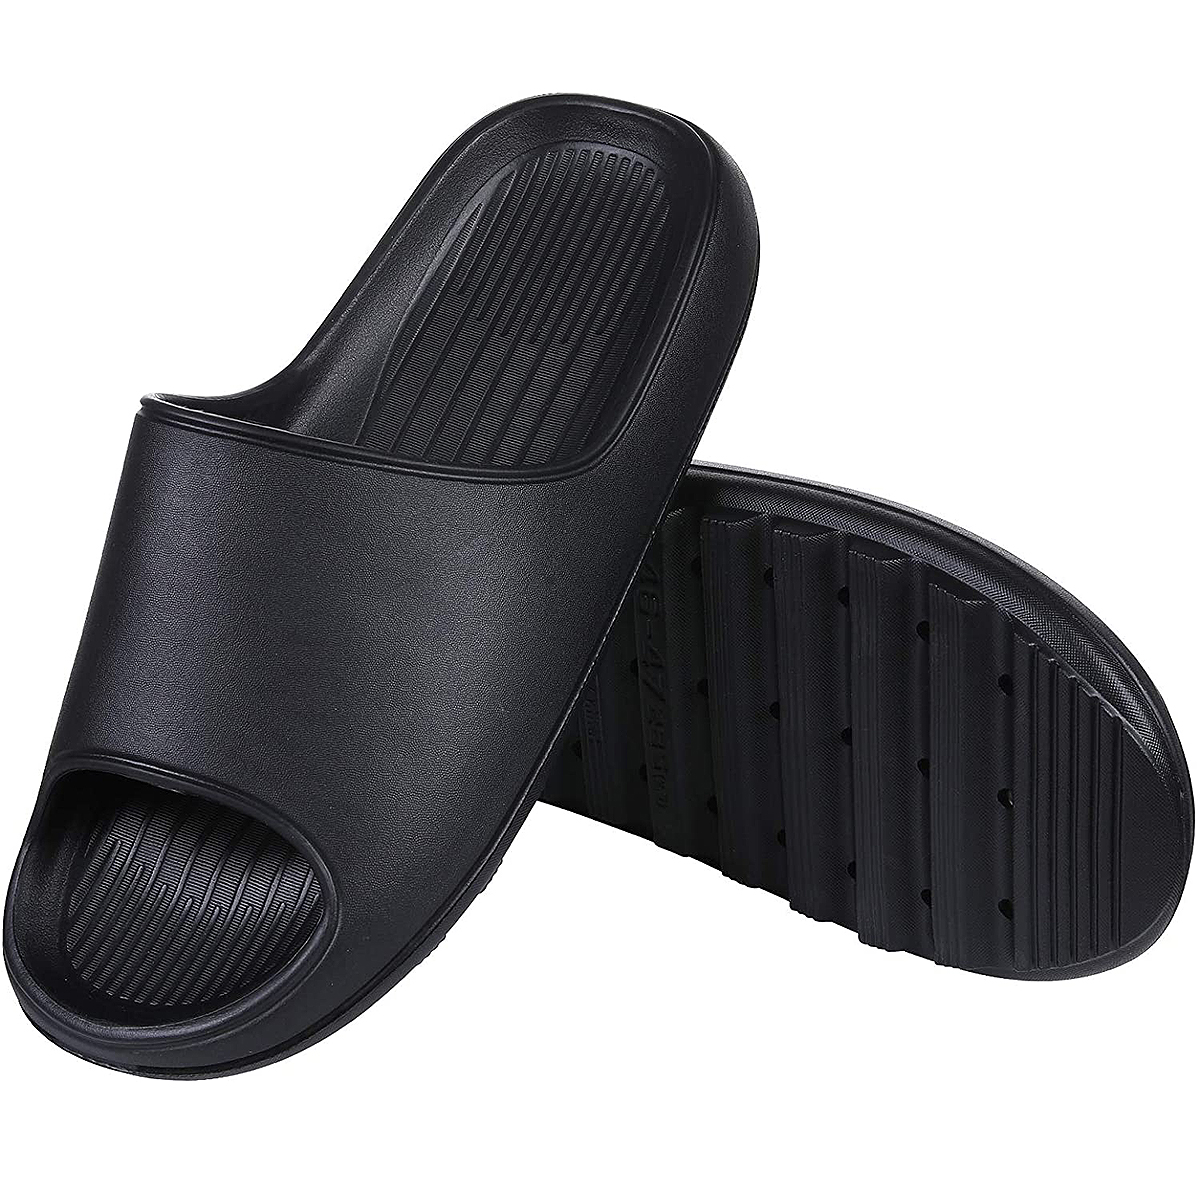 Yeezy-Style Slides on Amazon That Could Save You Hundreds